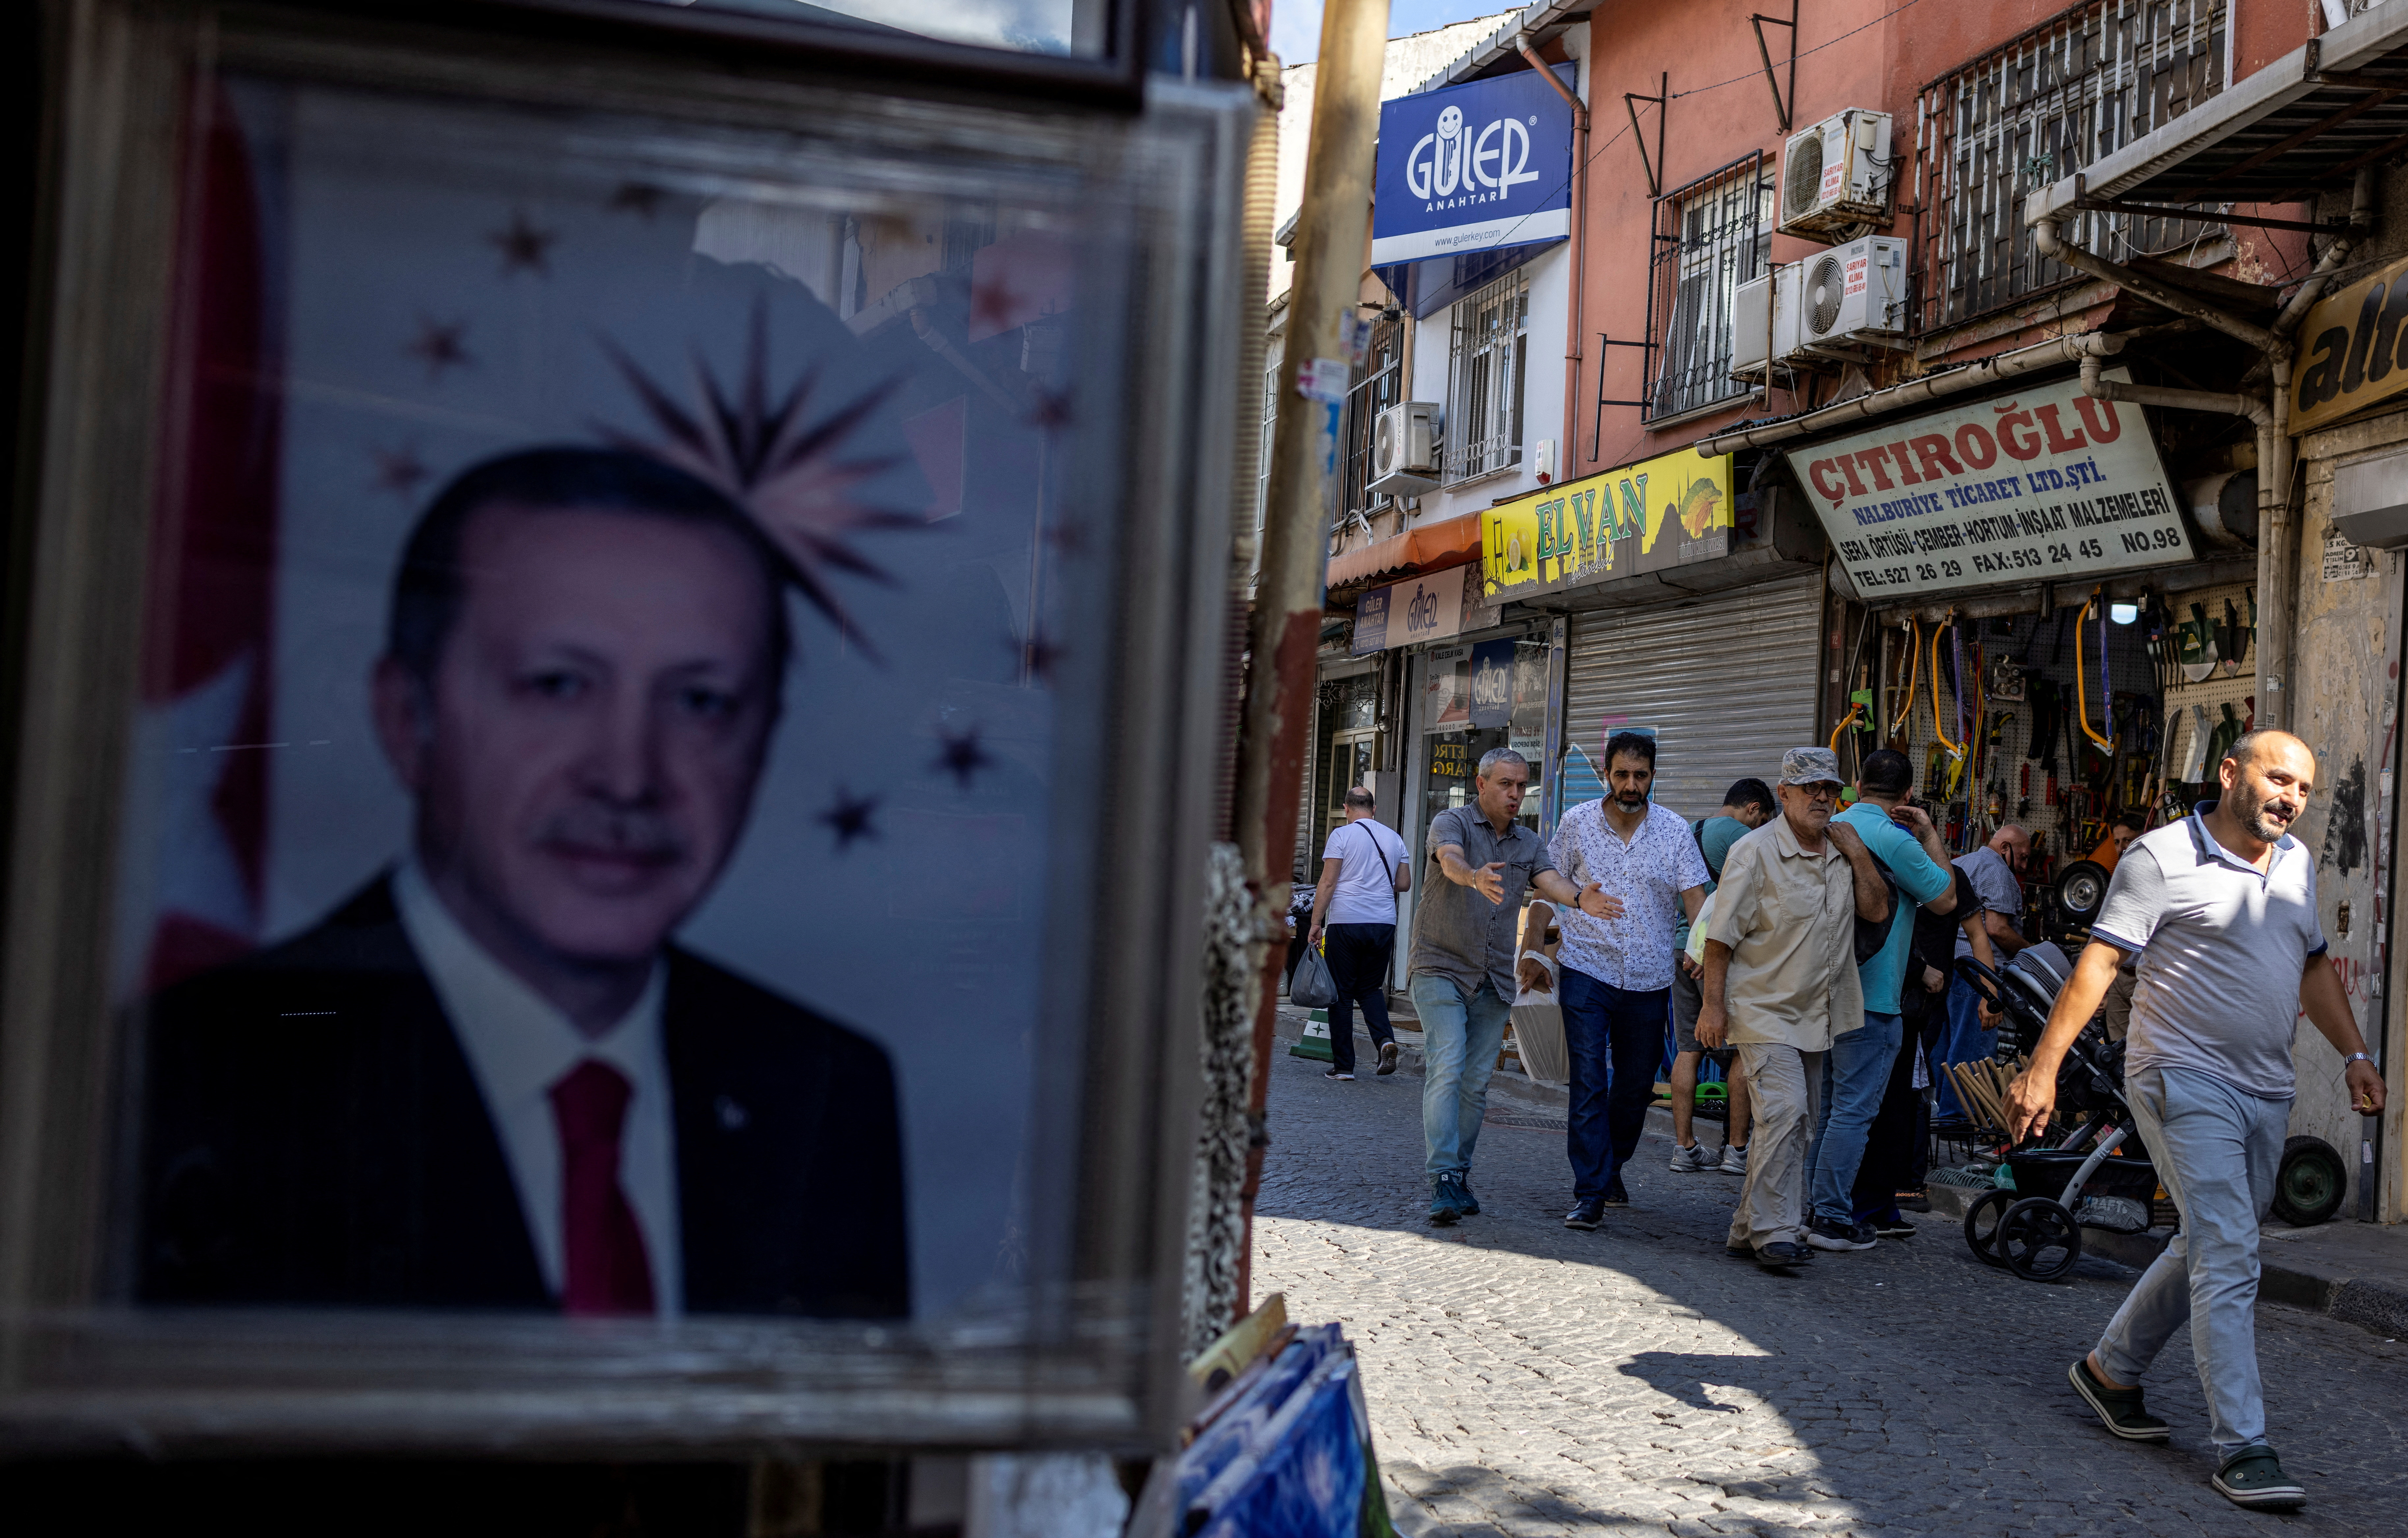 A portrait of Turkish President Tayyip Erdogan is seen at the entrance of a shop, in Istanbul